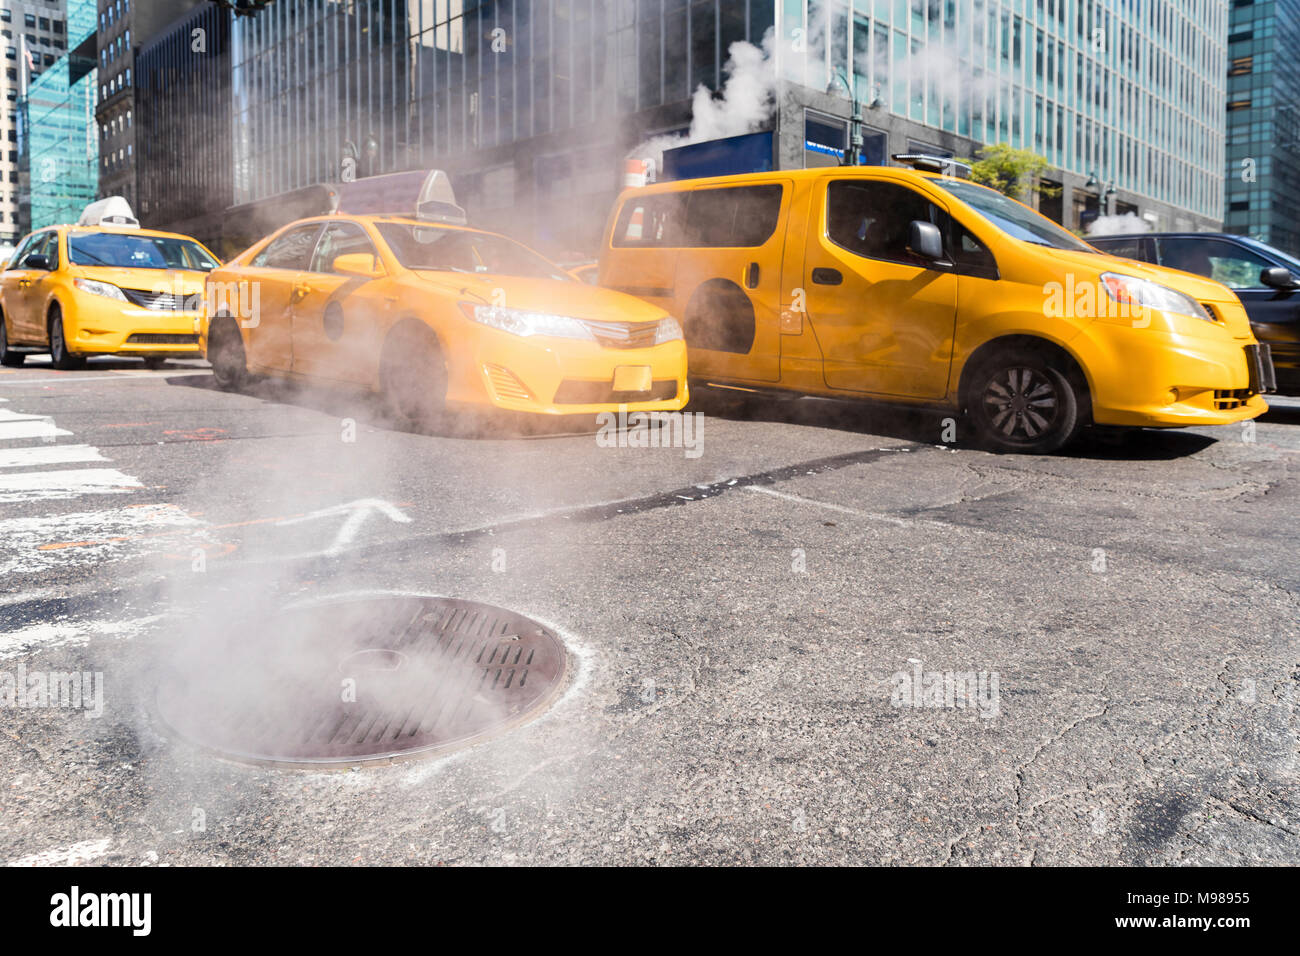 USA, New York, steam coming out from sewer Stock Photo